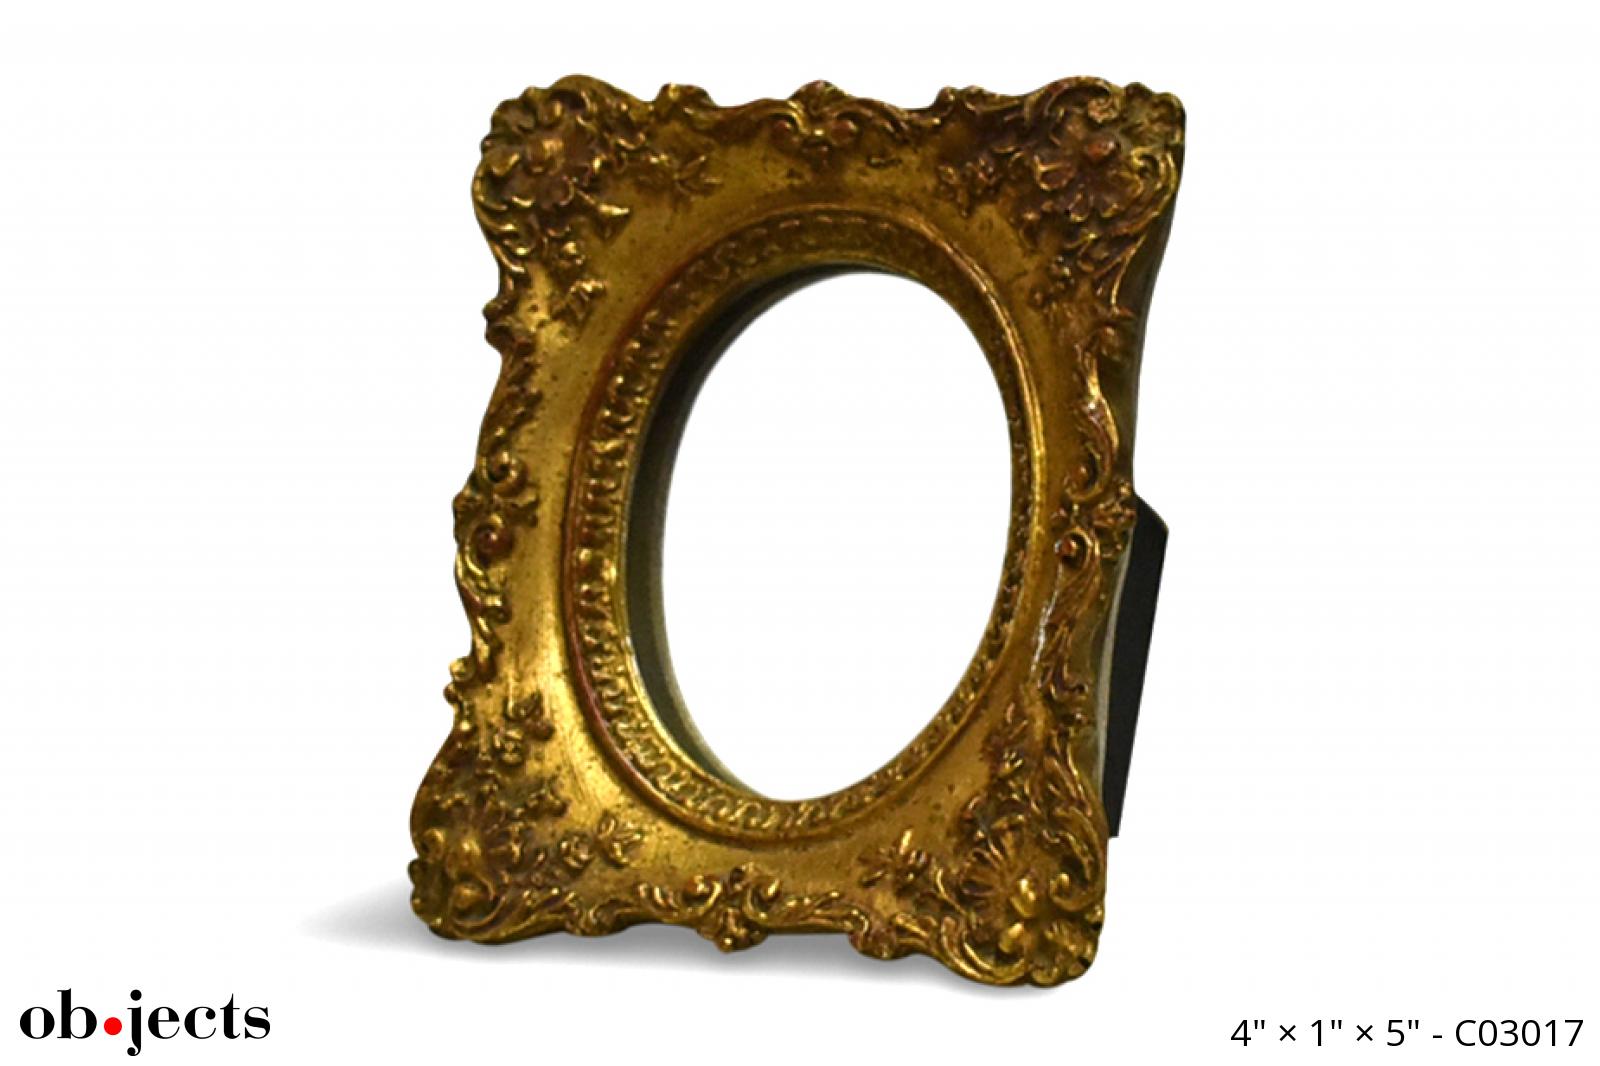 Mirror Small Gold Ornate Frame Ob Jects, Ornate Gold Mirror Small